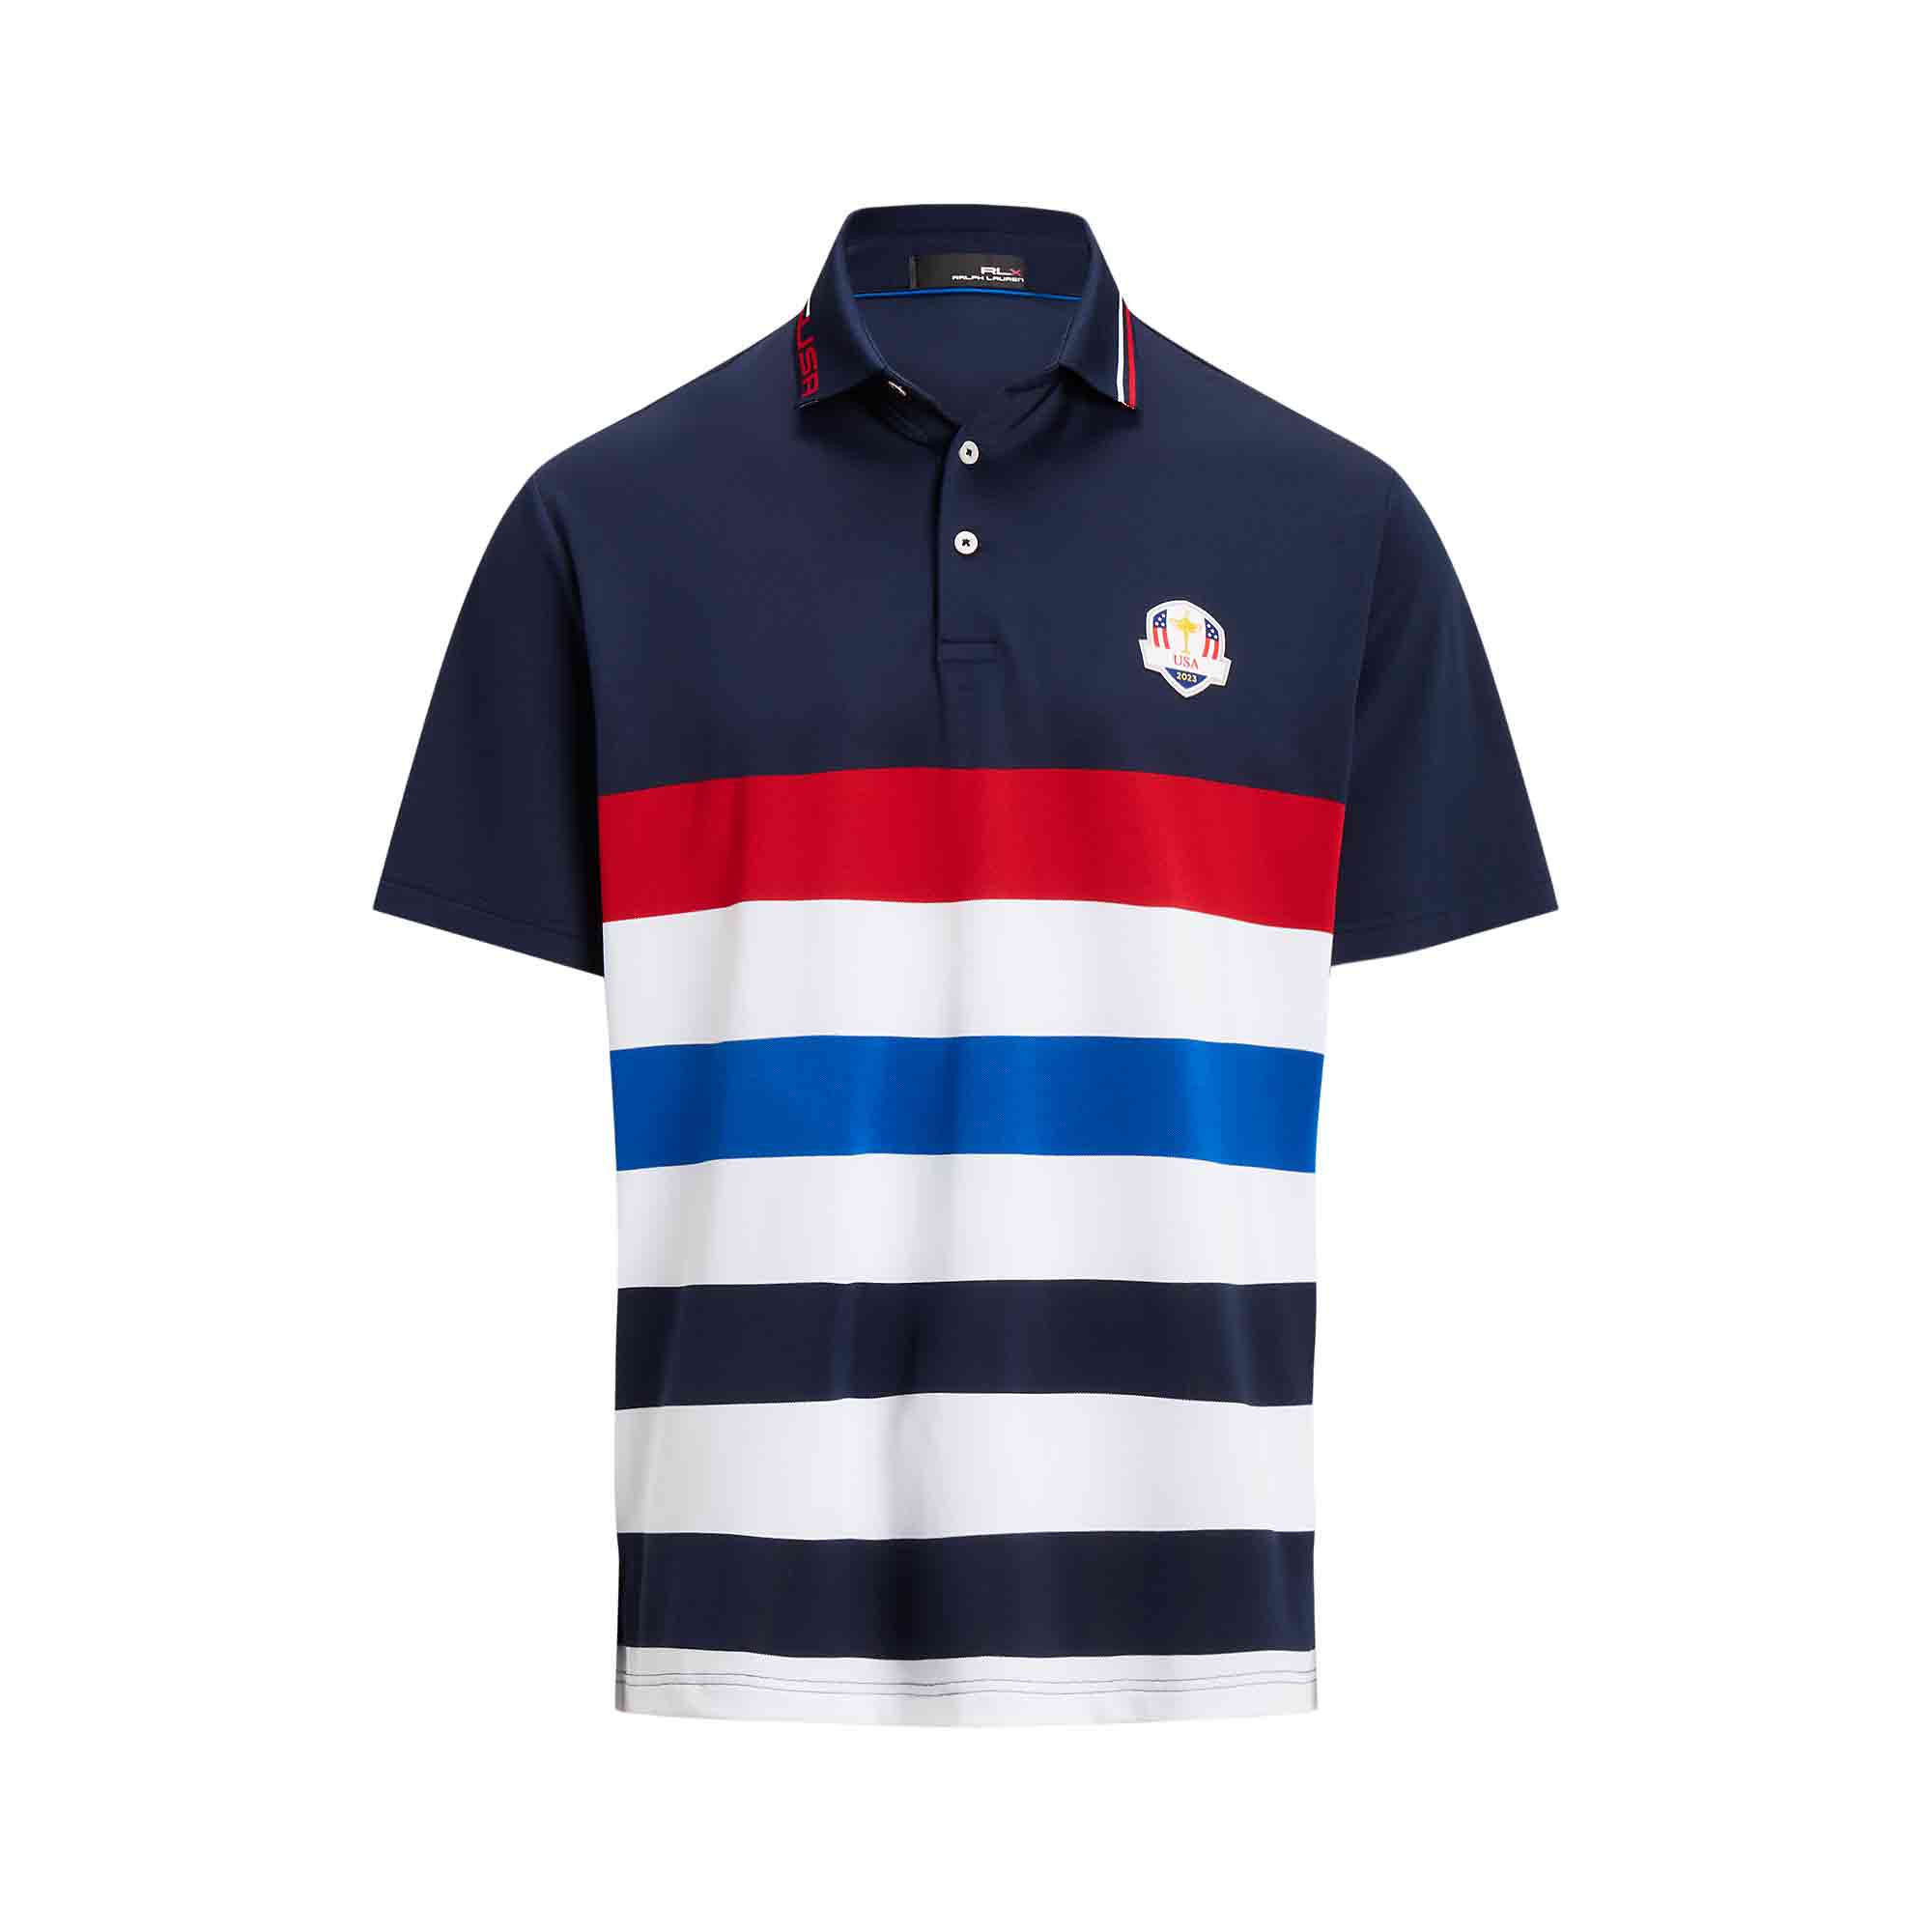 U.S. Ryder Cup apparel from RLX Golf Shop our 10 favorite pieces